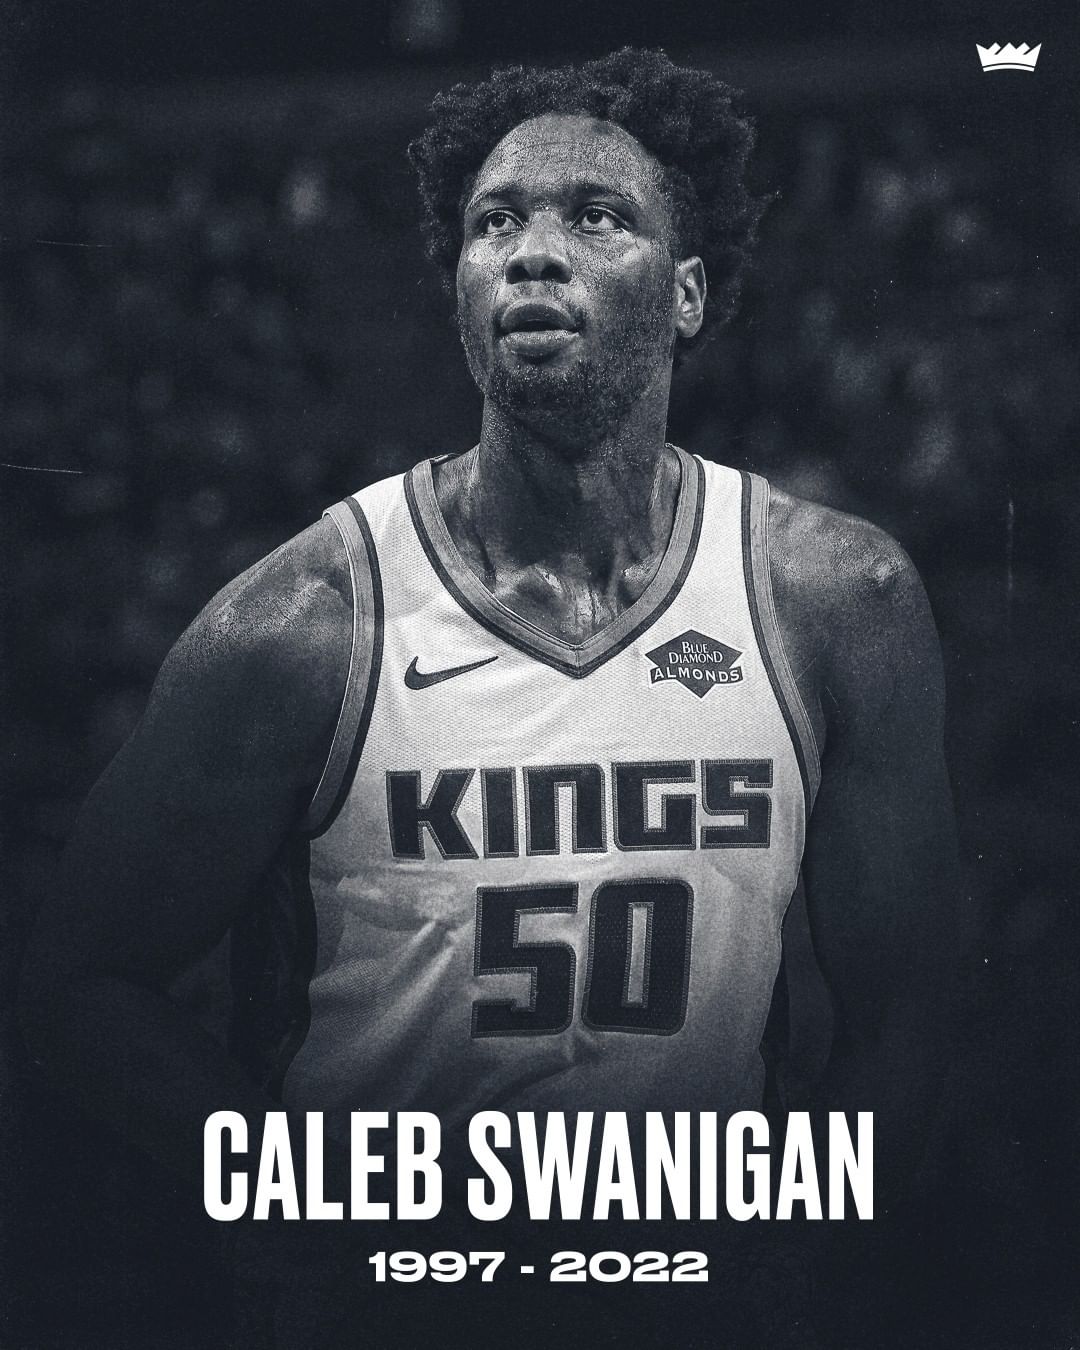 We are deeply saddened to learn of the passing of Caleb Swanigan. He will be rem...